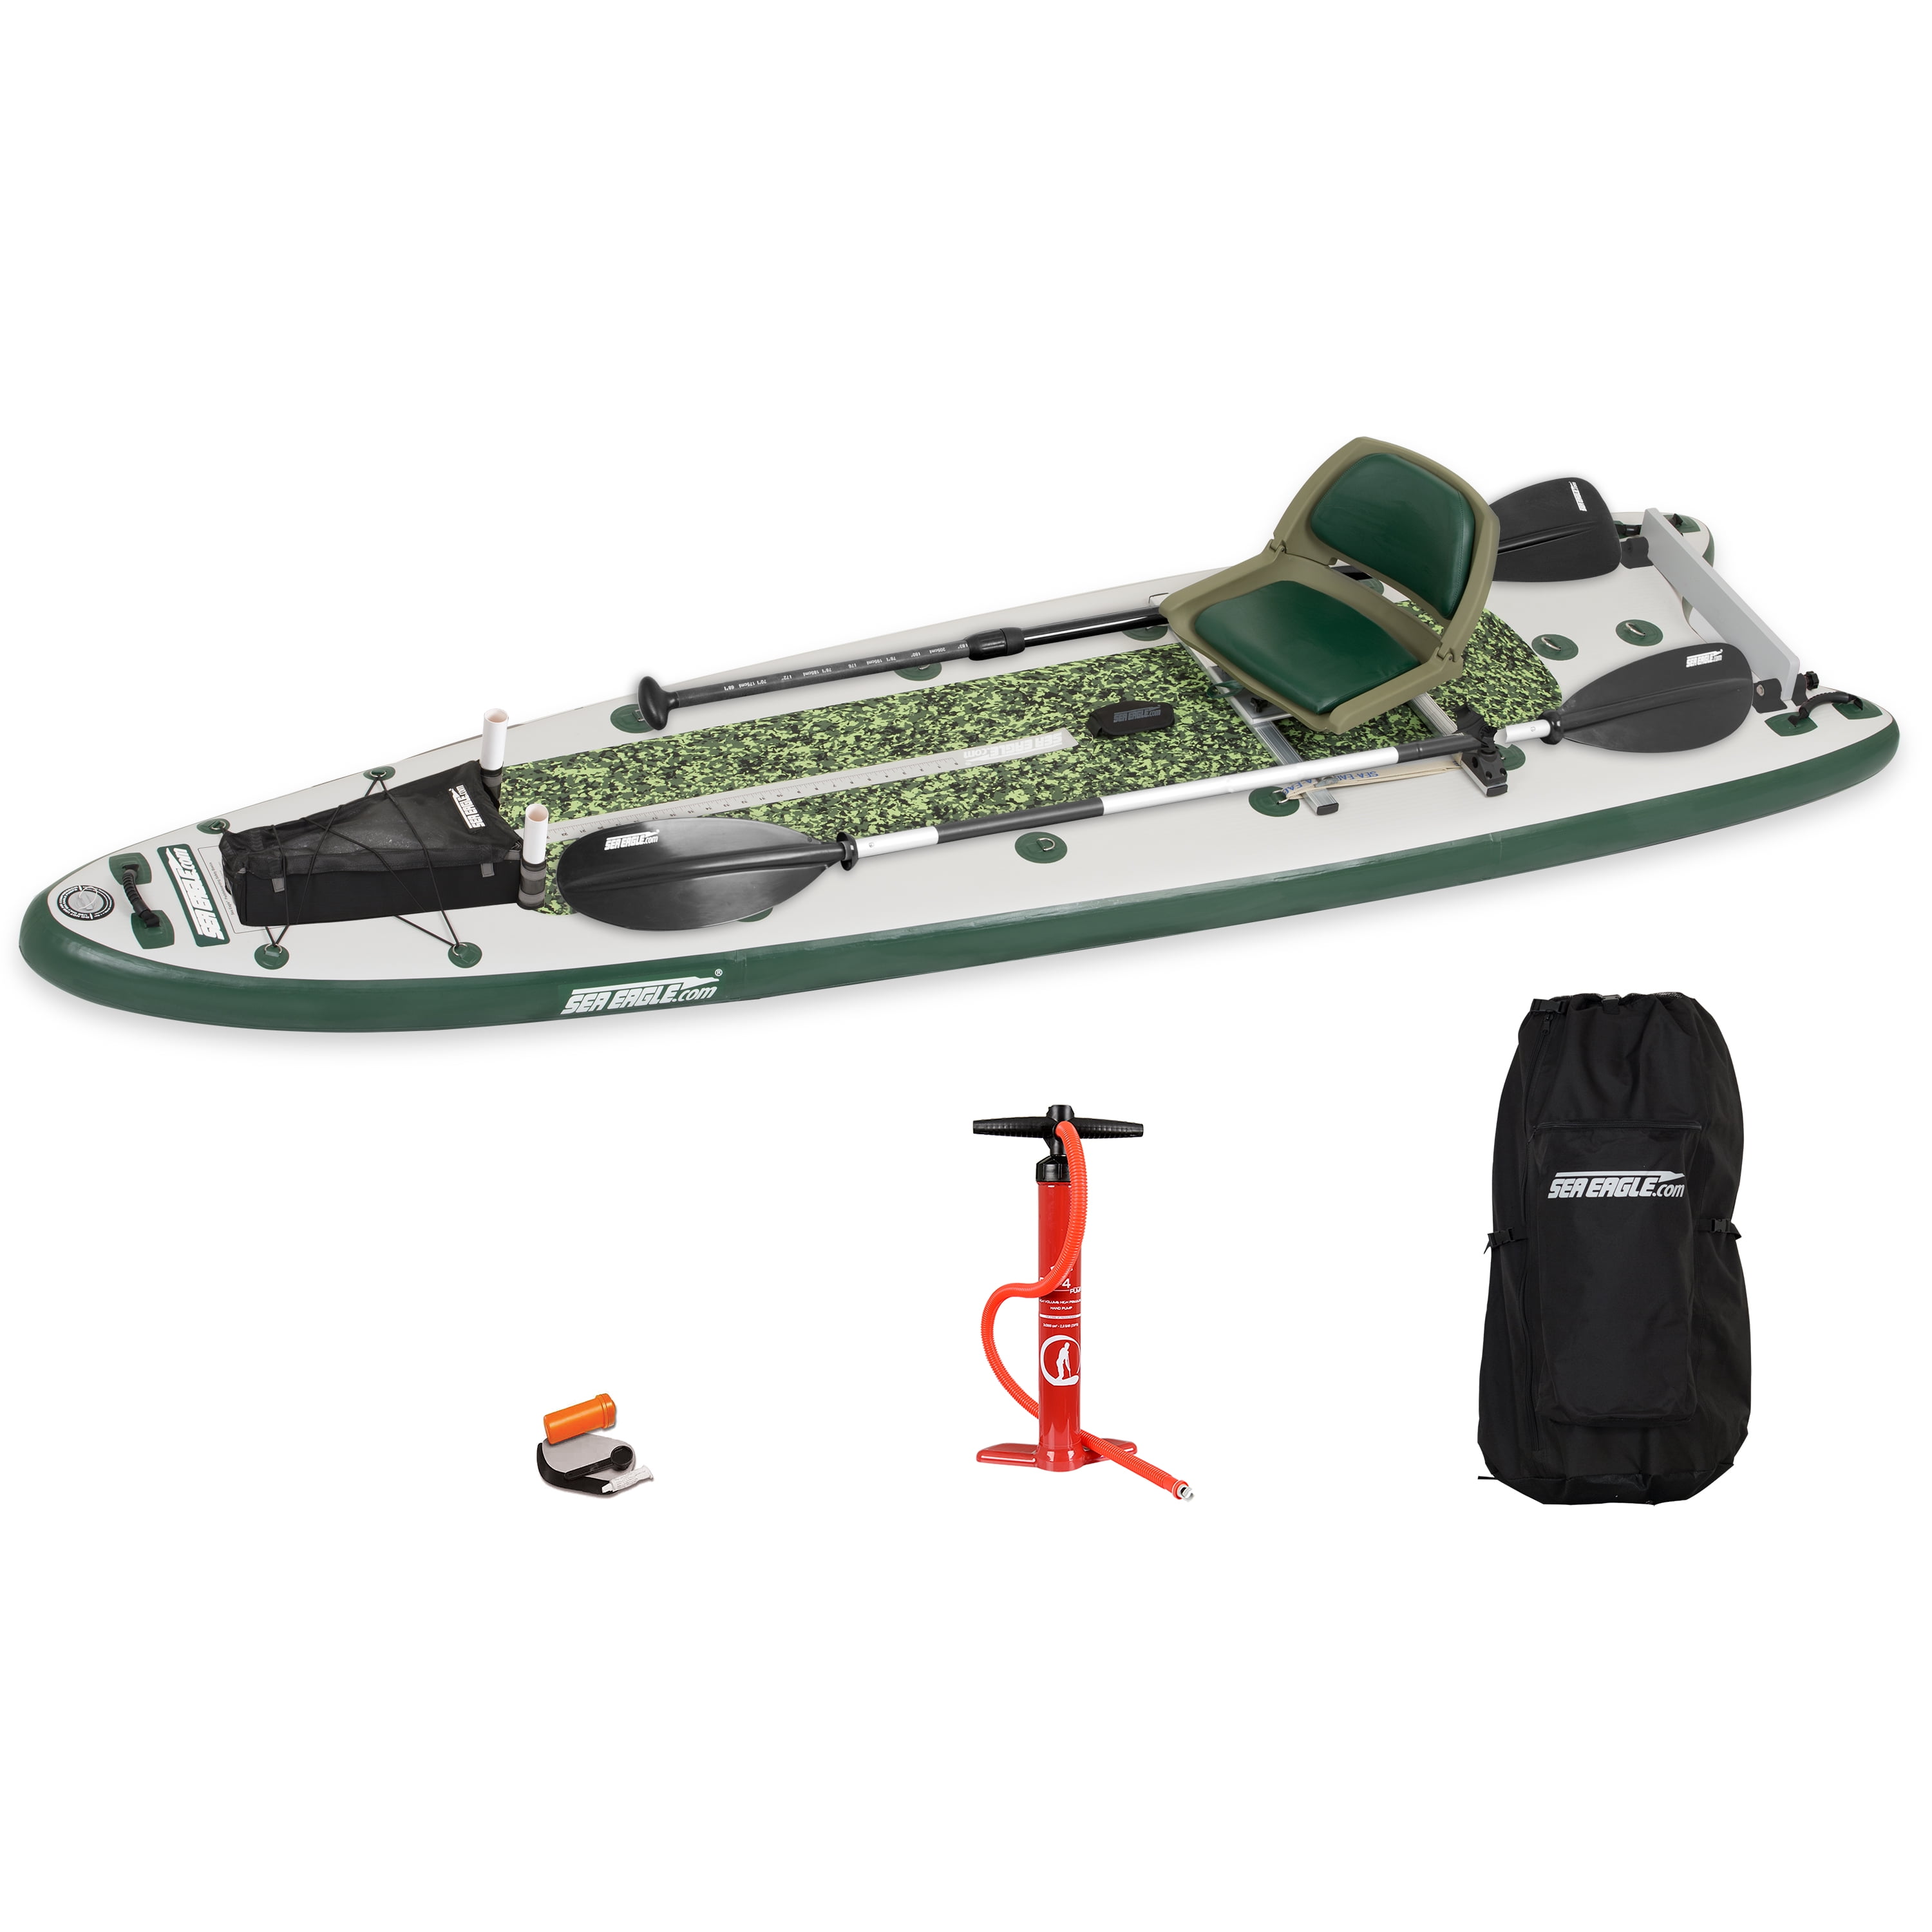 Sea Eagle FS126 12'6” Inflatable FishSUP Fishing Stand-Up Paddleboard  w/Paddle(s), Storage Box, Pump, Removable Transom, Backpack/Optional Seat -  Sit, Stand, Fish, Motor, or Troll- Start Up Package 